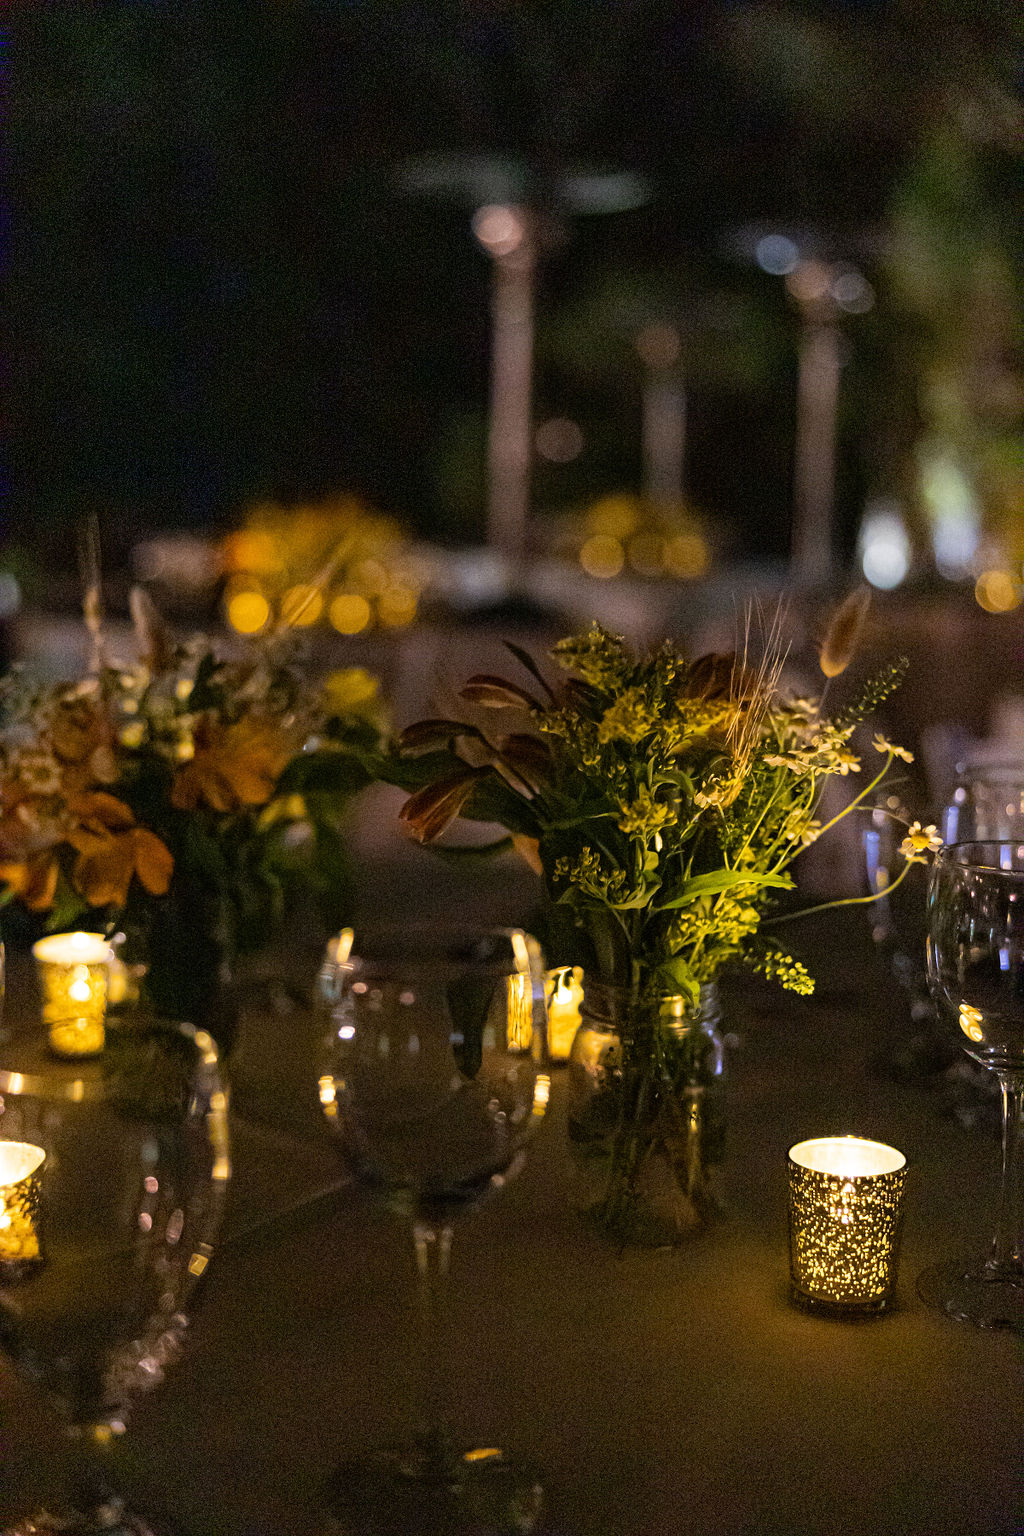 Flowers, wine glasses and candlelight